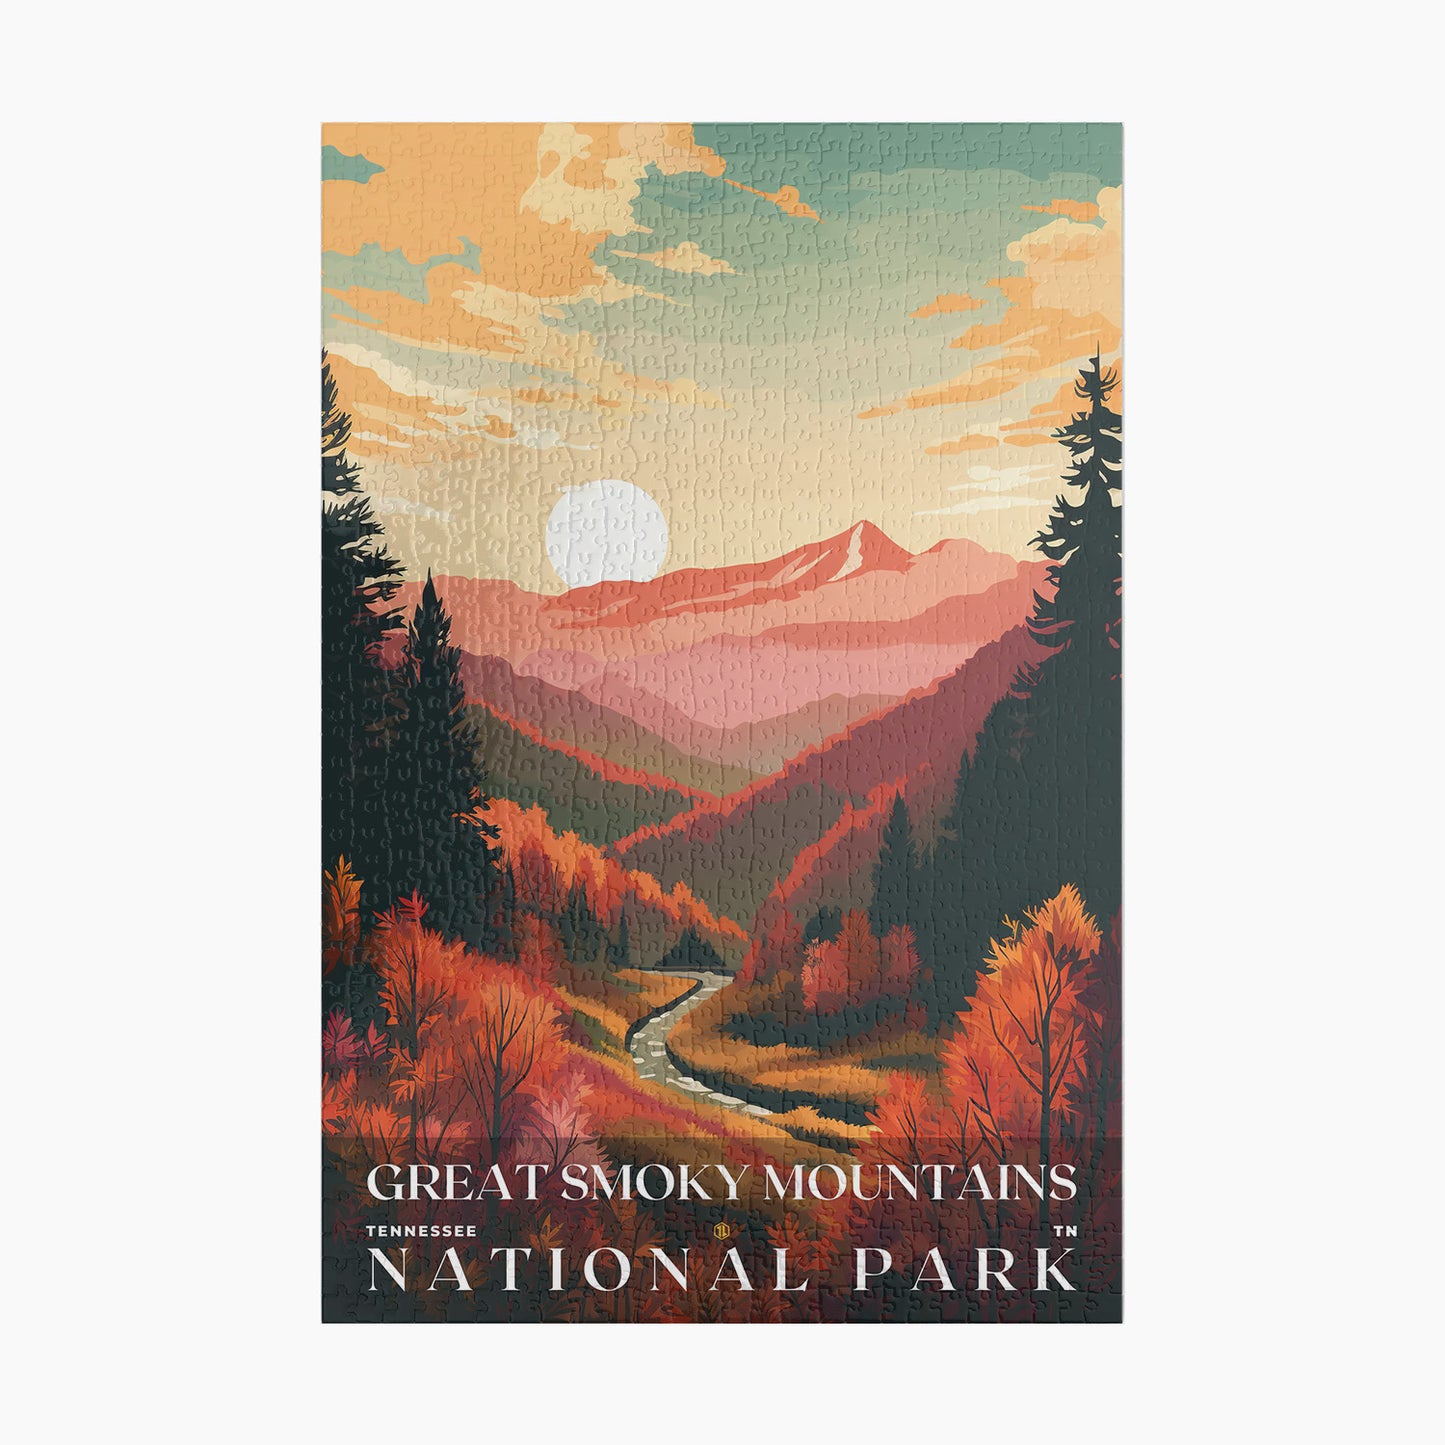 Great Smoky Mountains National Park Puzzle | US Travel | S01